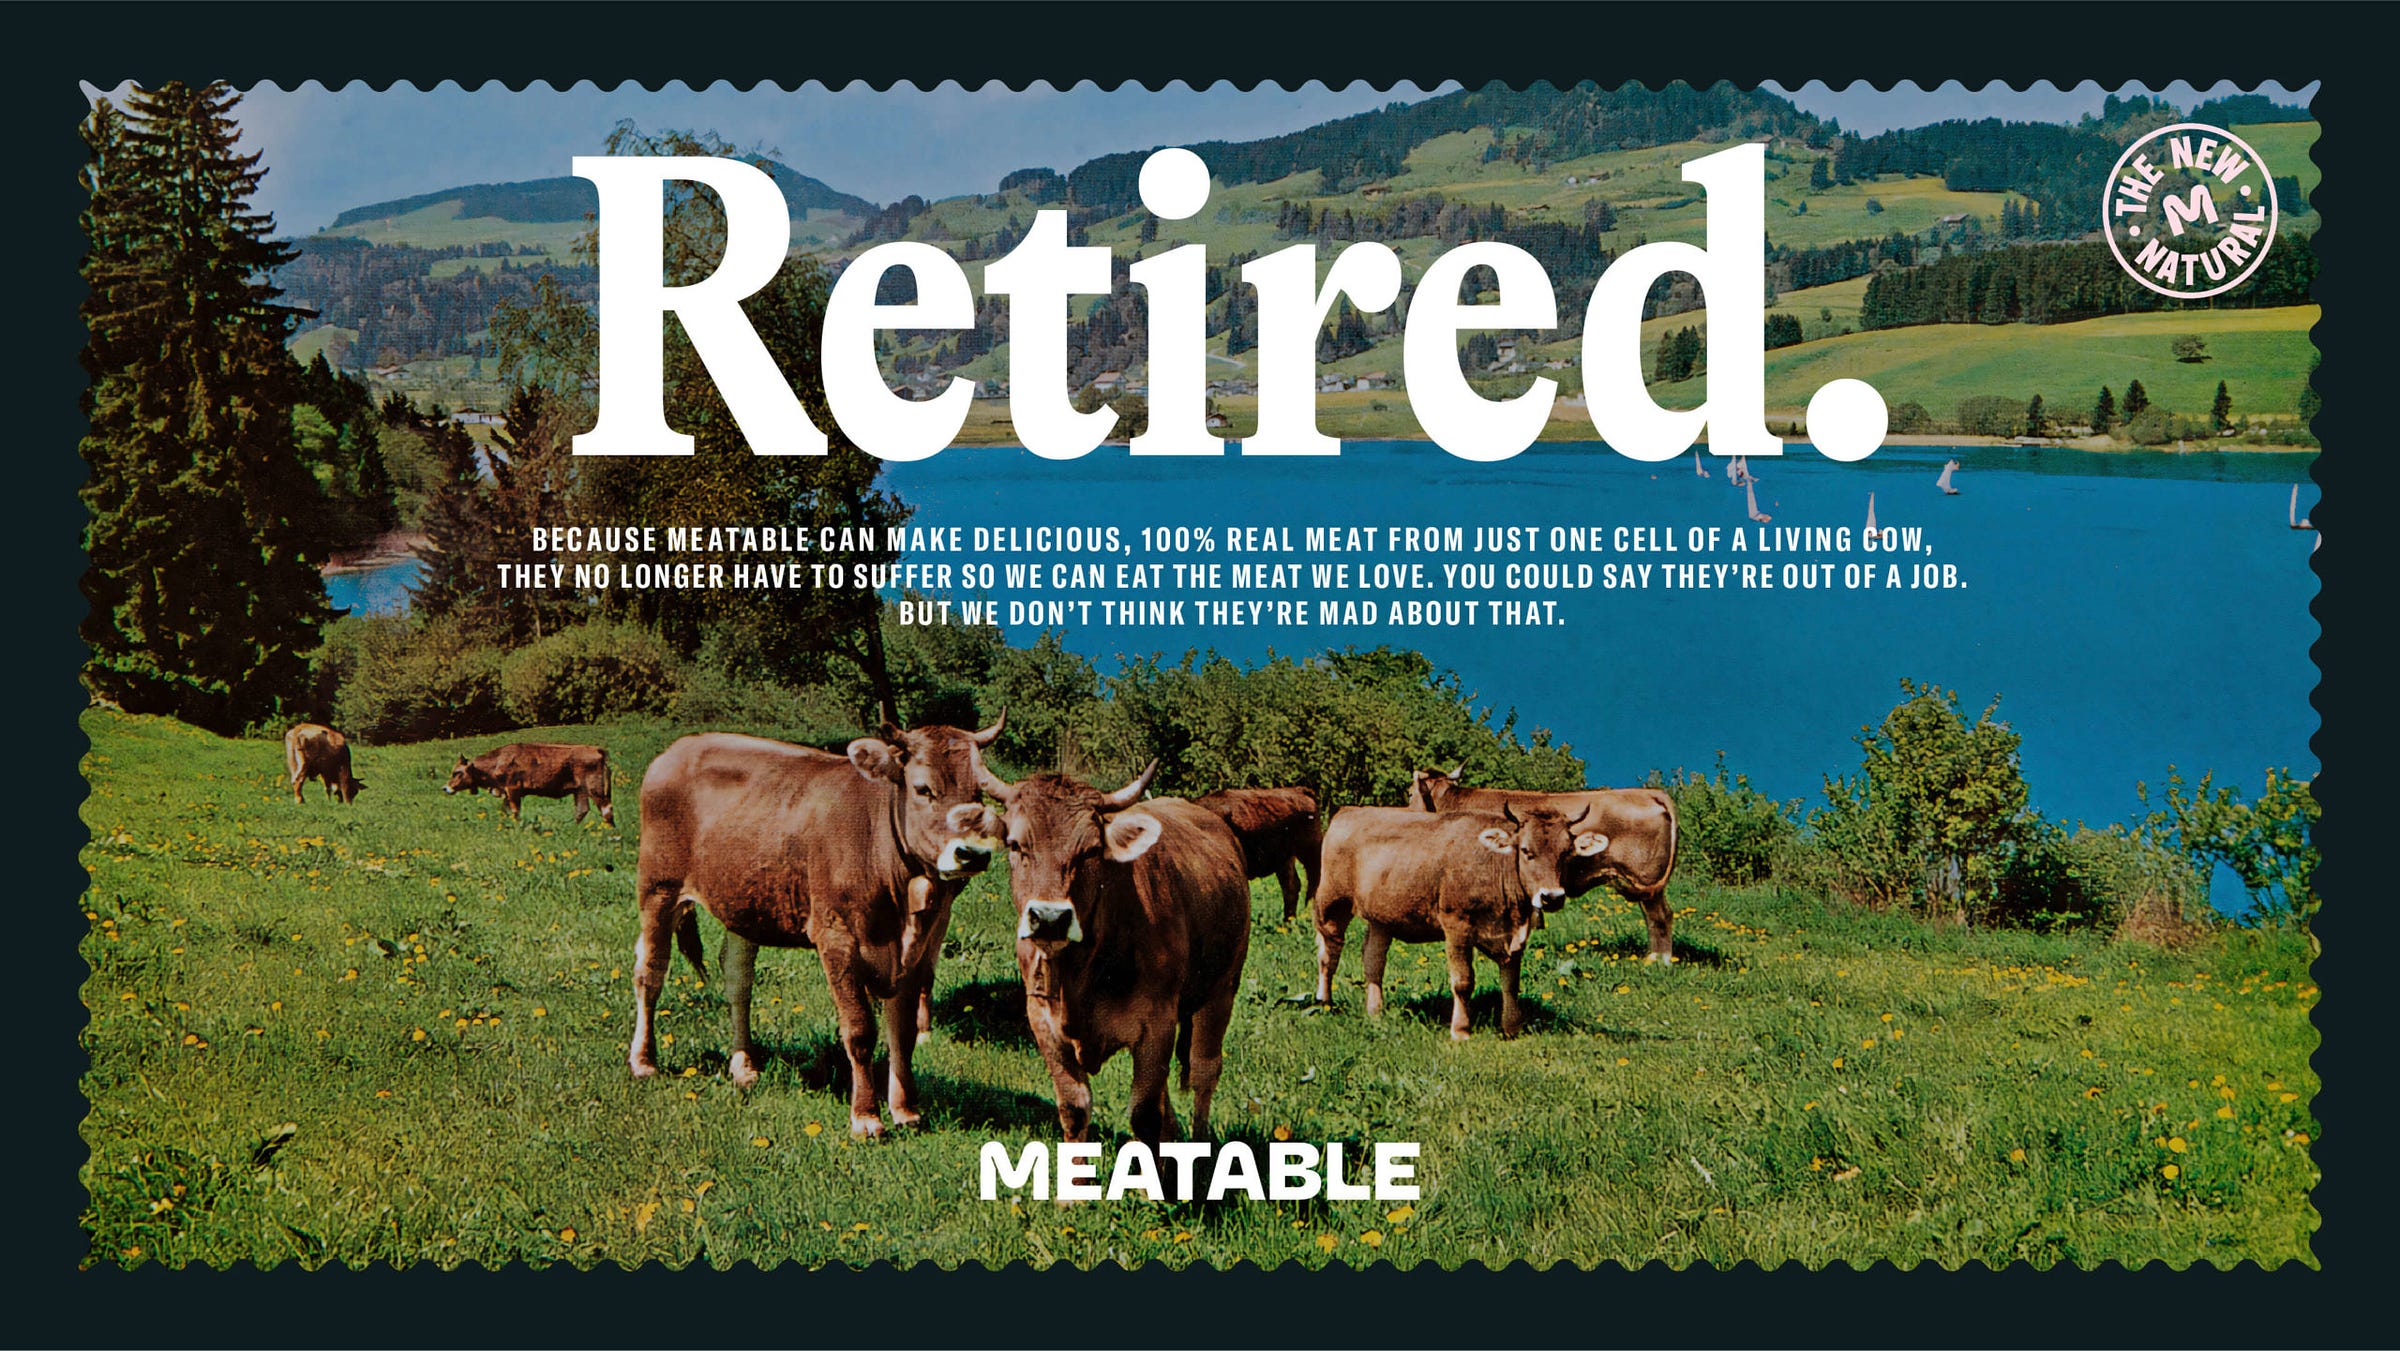 Image of cows on a grassy hill in front of a lake. Above them is the word "Retired."